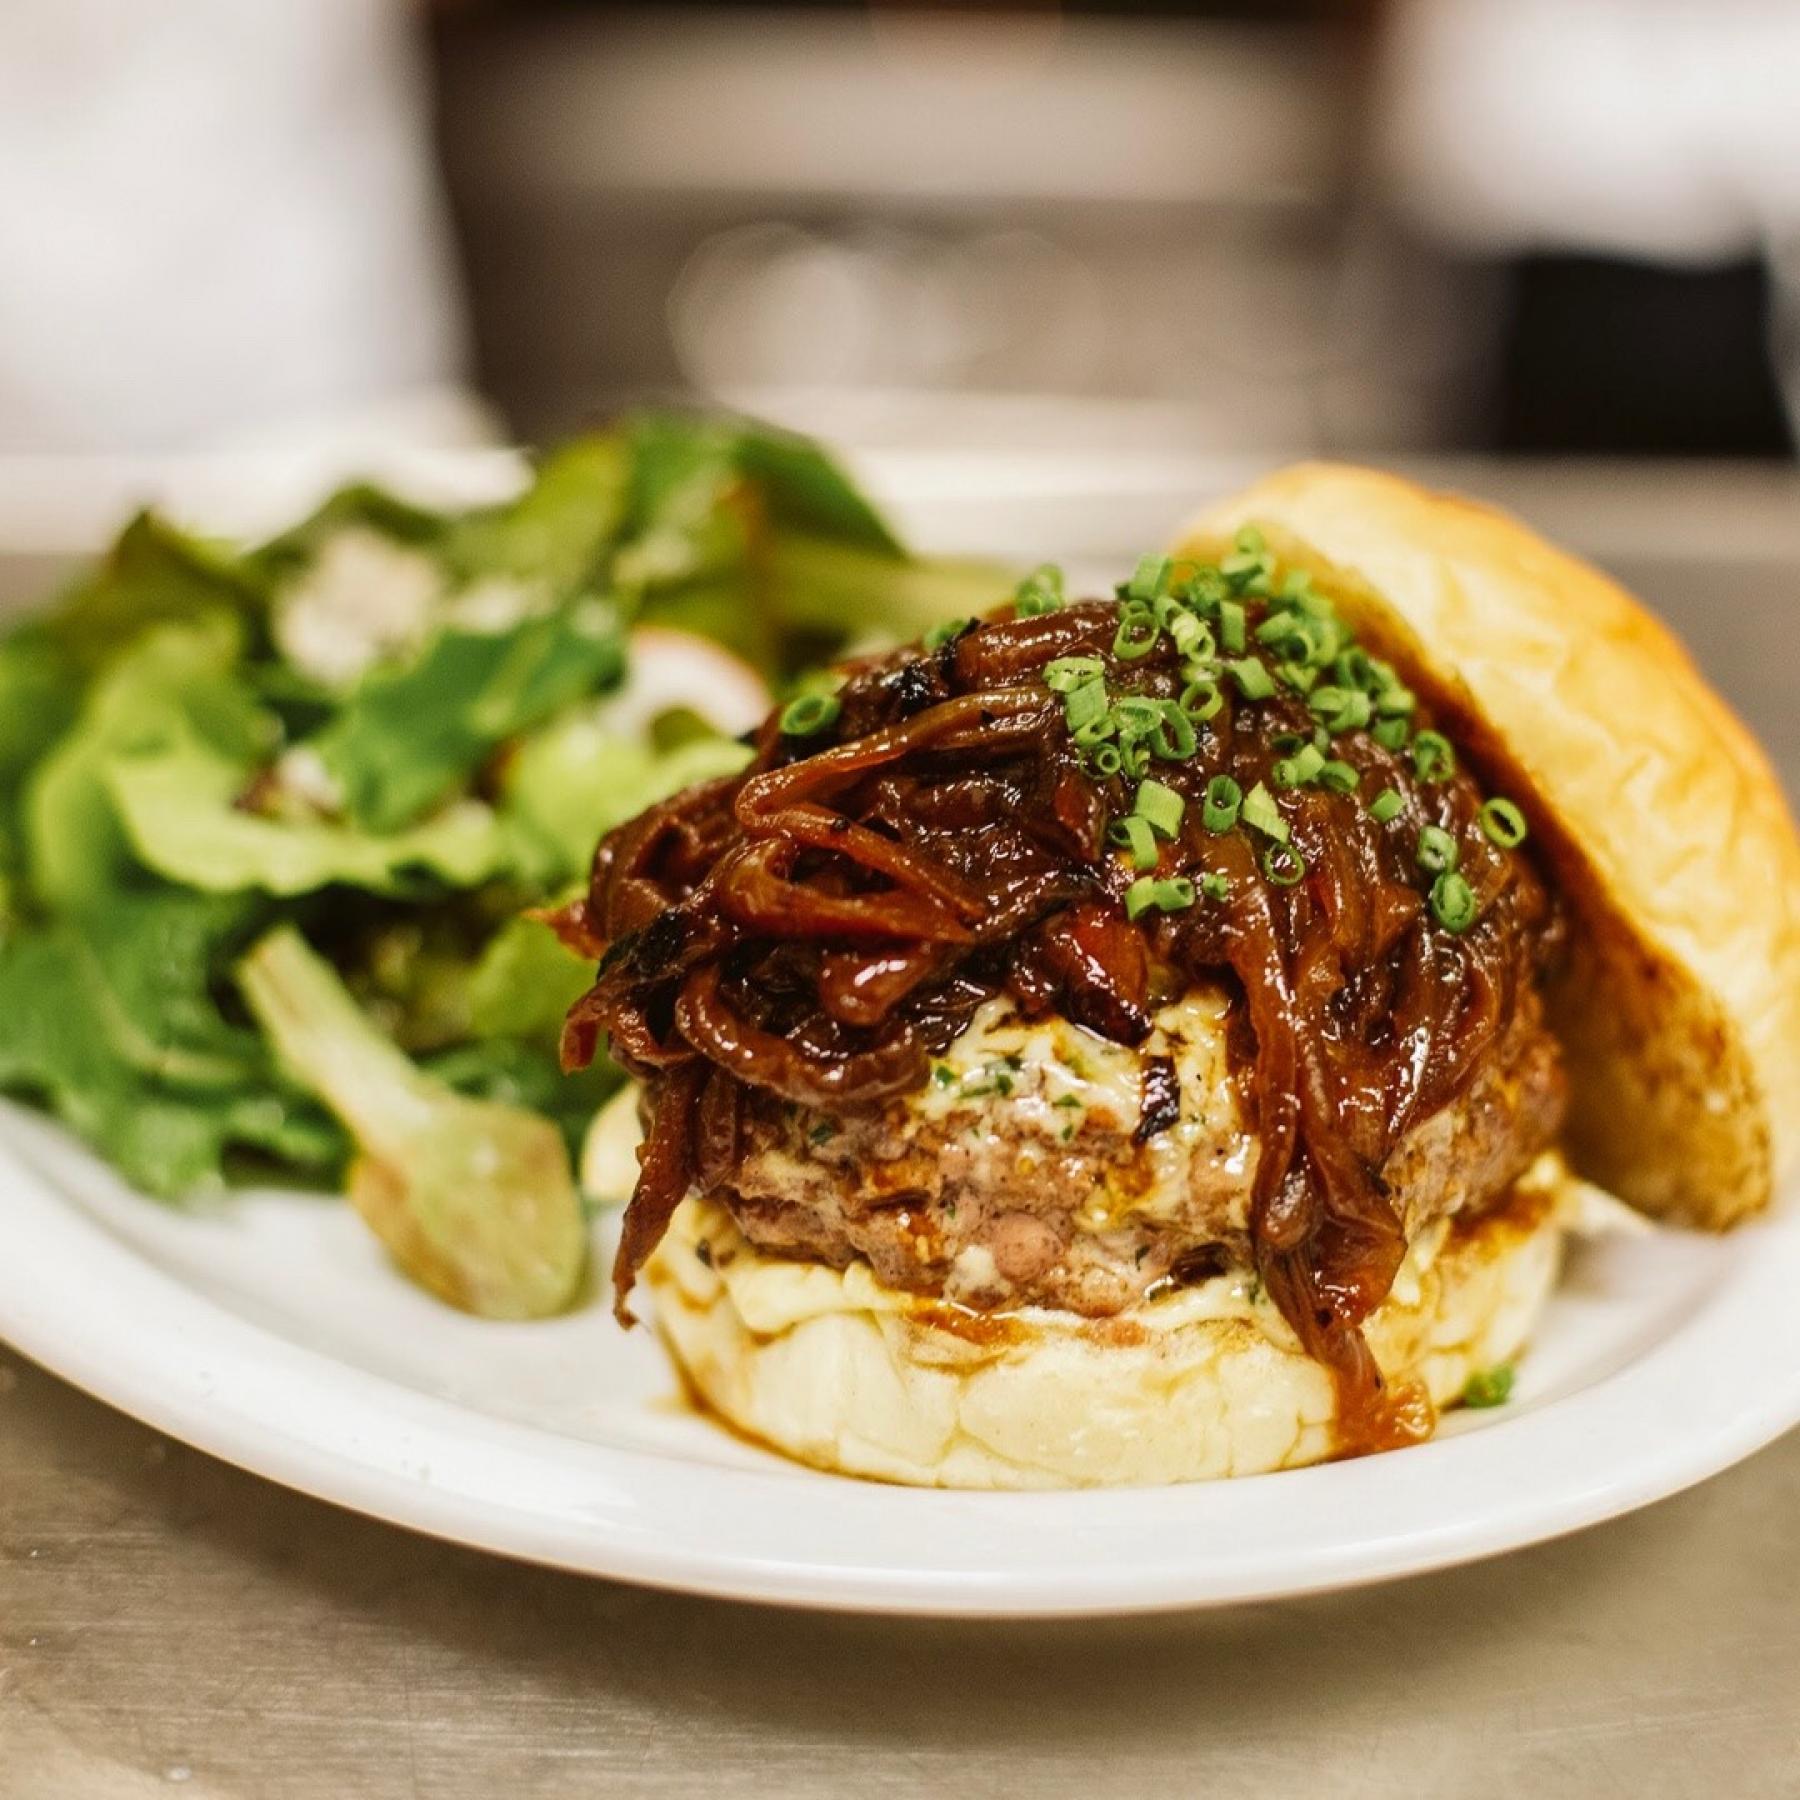 The Graze Burger available at Graze on the Capitol Square